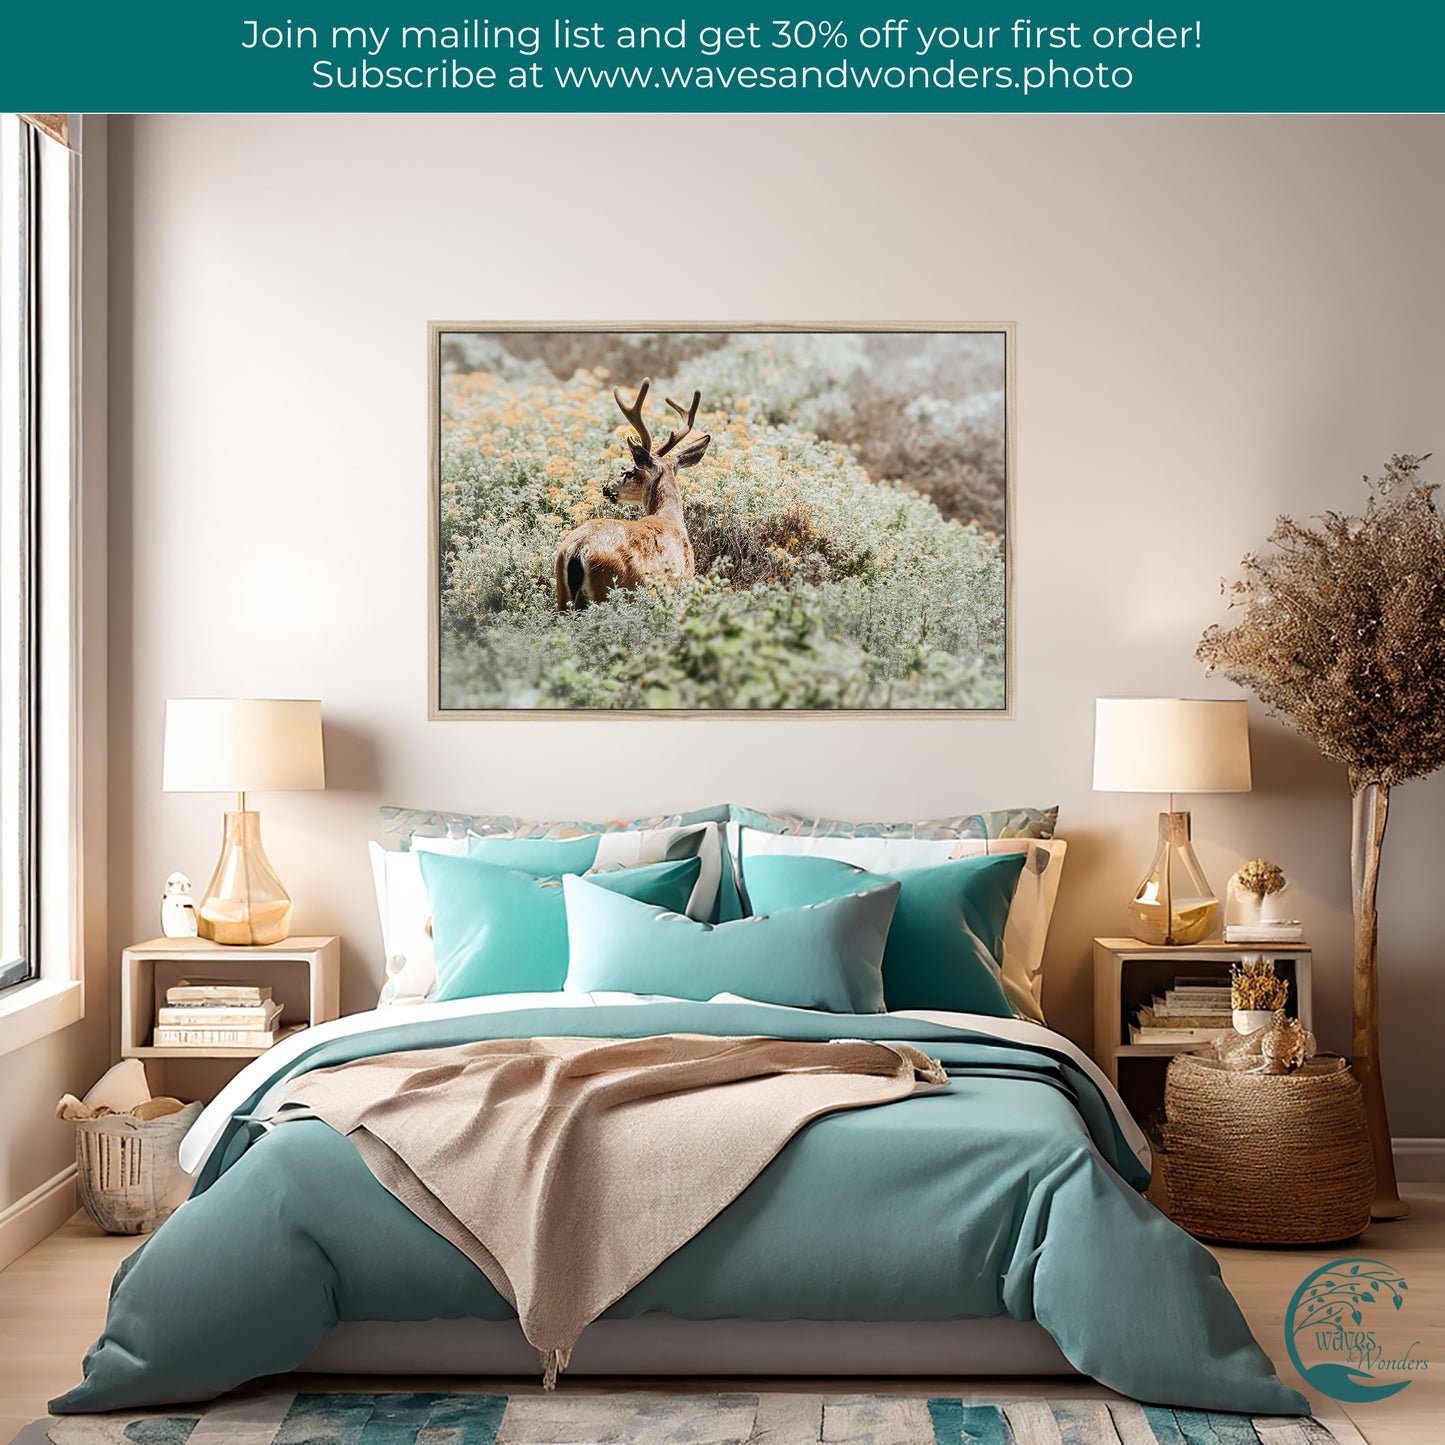 a picture of a deer on a wall above a bed